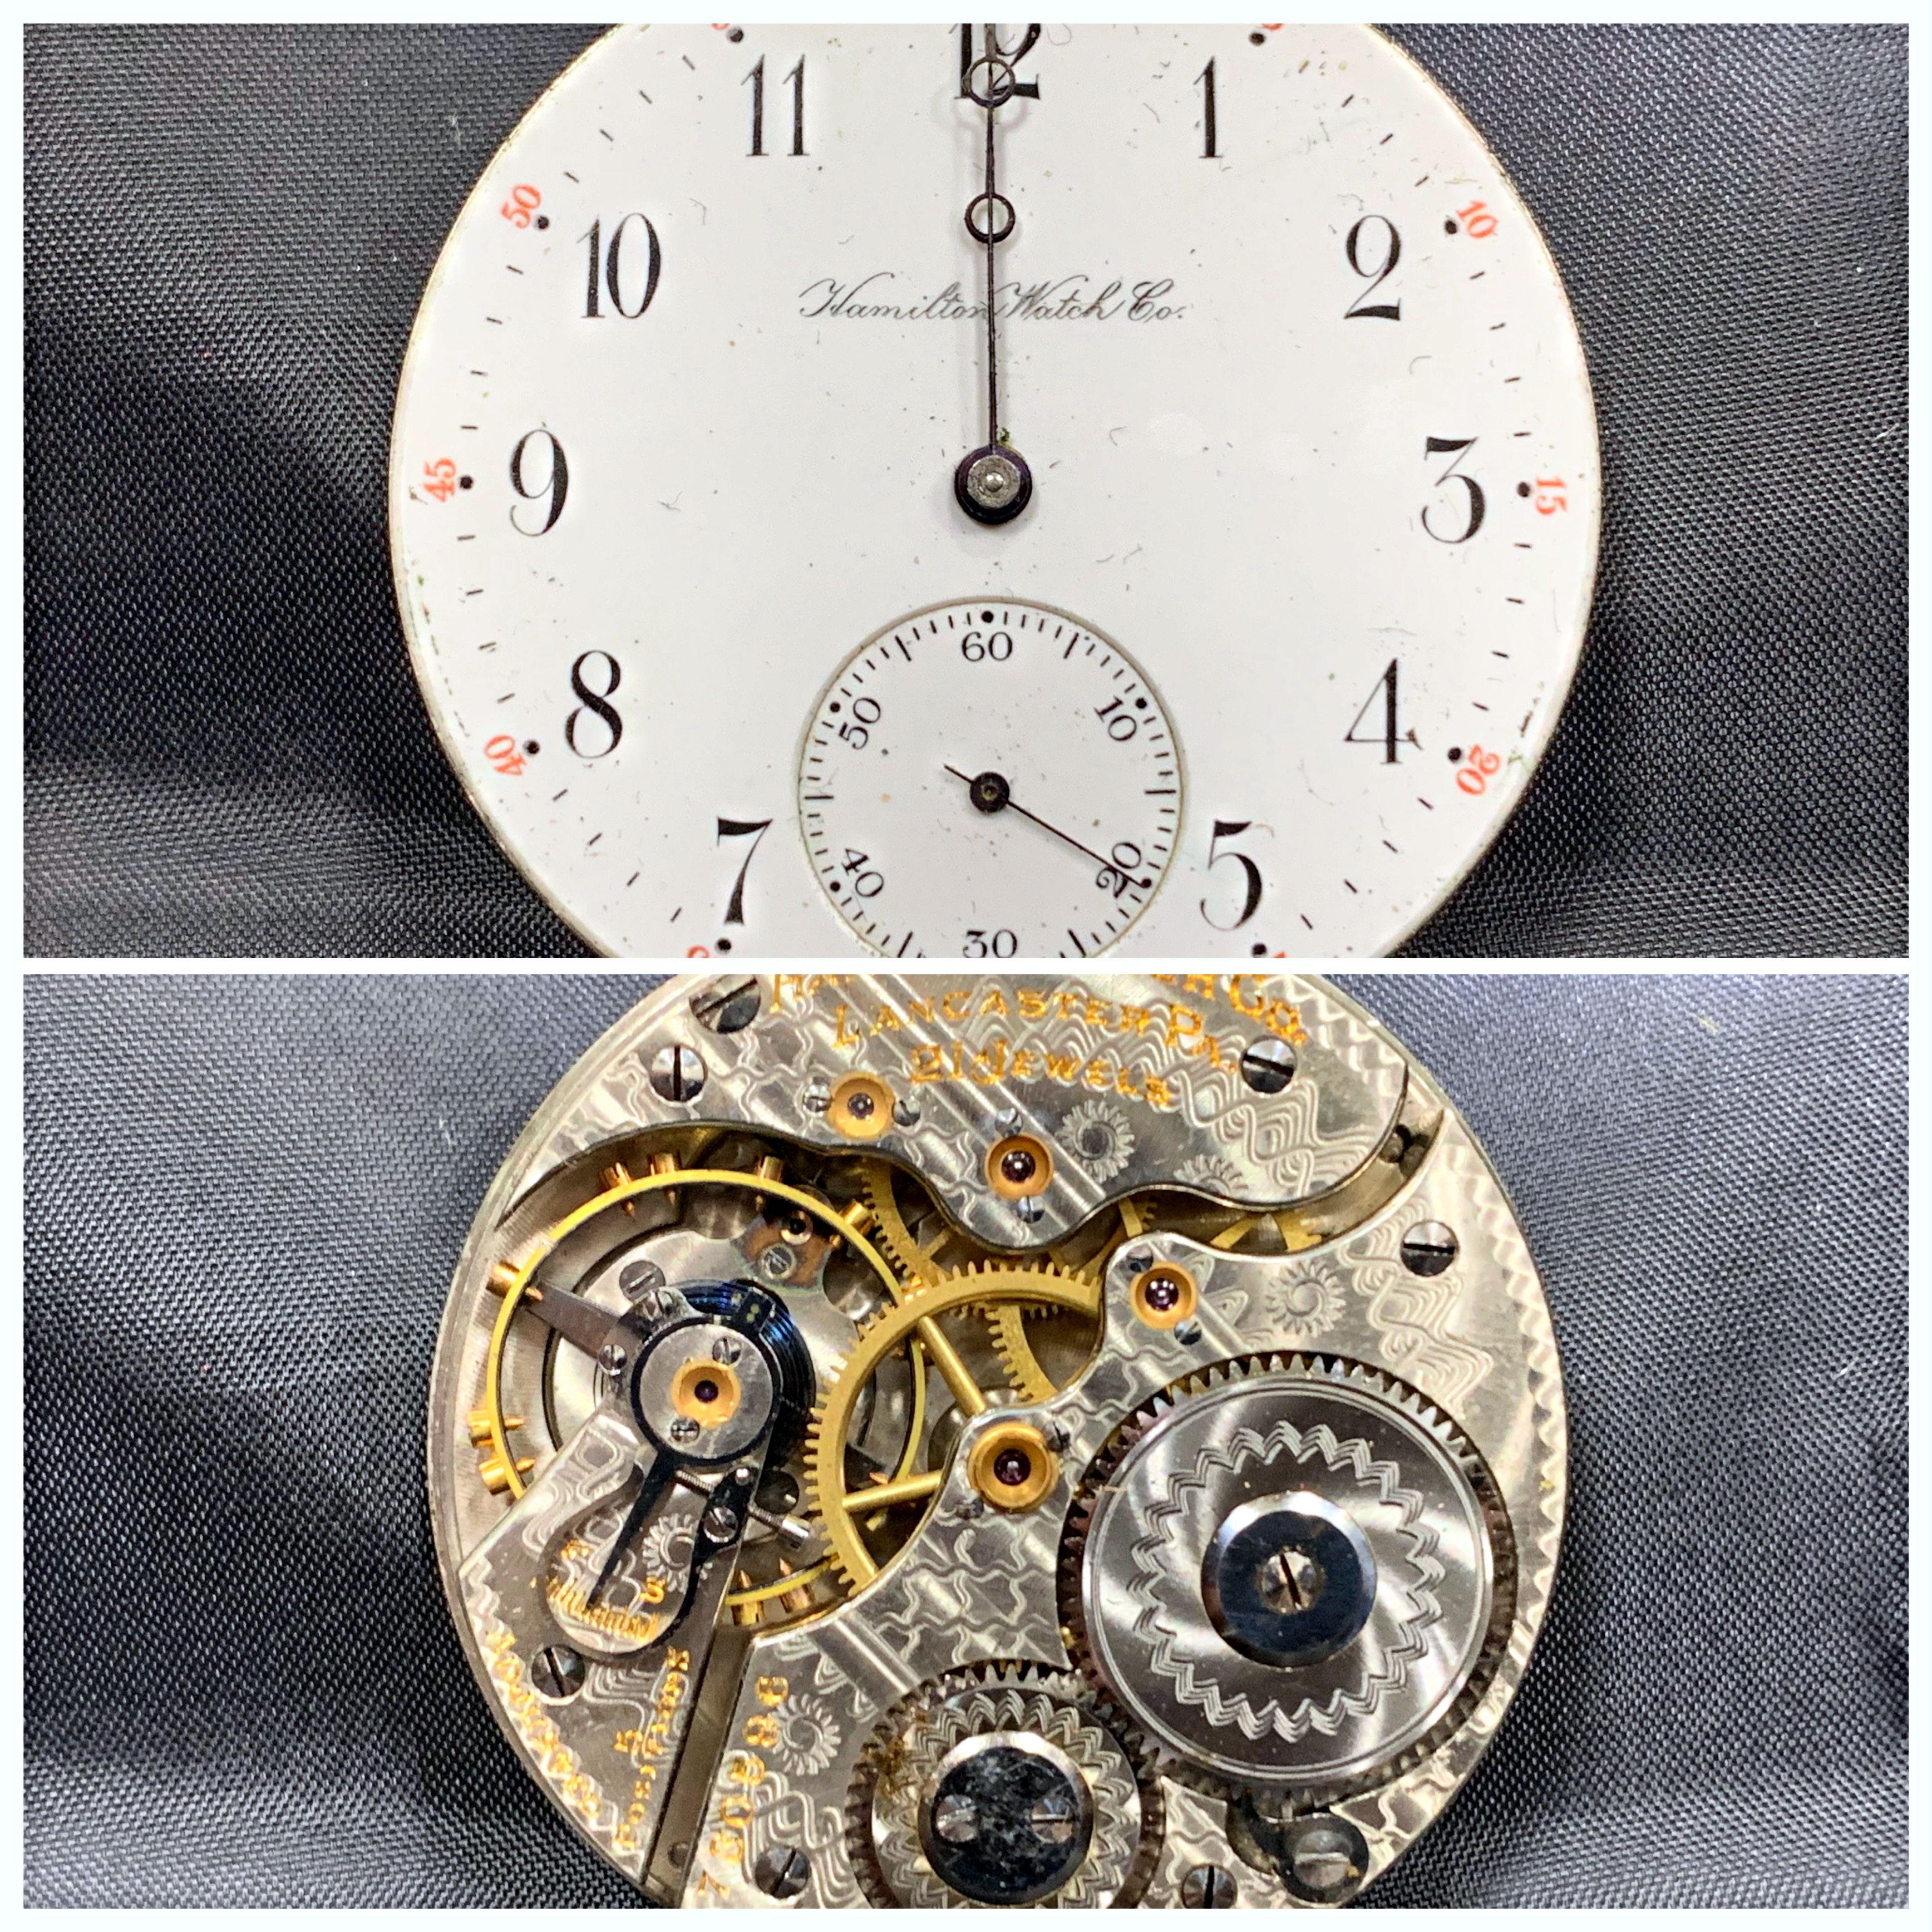 Repaired pocket watch from 1880’s